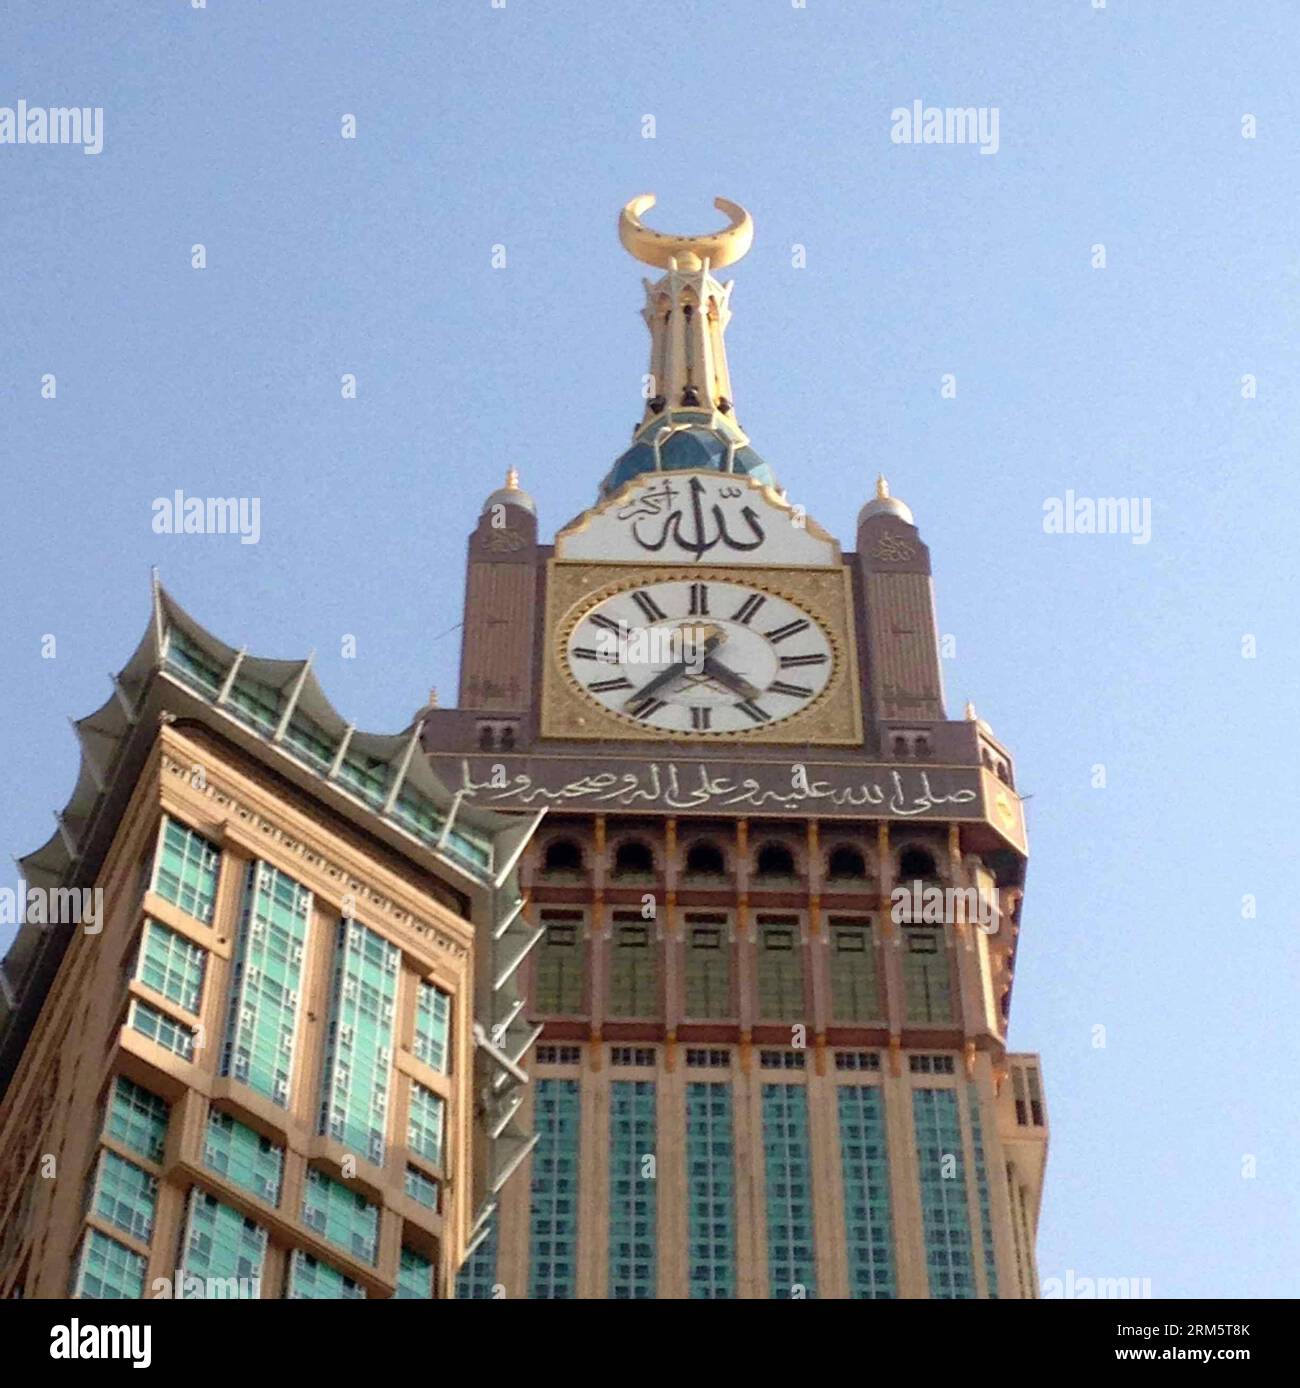 (131114) -- RIYADH, Nov. 14, 2013 (Xinhua) -- Picture taken on Oct. 10, 2013 shows Makkah Tower in Makkah, Saudi Arabia. Makkah Tower retains its place as the 2nd tallest building in the world. Standing at the height of 1,972 feet (601.07 m), the Abraj Al-Bait Tower, also known as Makkah Royal Clock Tower, has been declared the second tallest building in the world by the United States Council on Tall Buildings and Urban Habitat that is recognized as a world authority on supersized skyscrapers. Only Burj Khalifa in Dubai, which is 2,717 feet (828.14 meter) tall, surpasses the Makkah Clock Tower Stock Photo